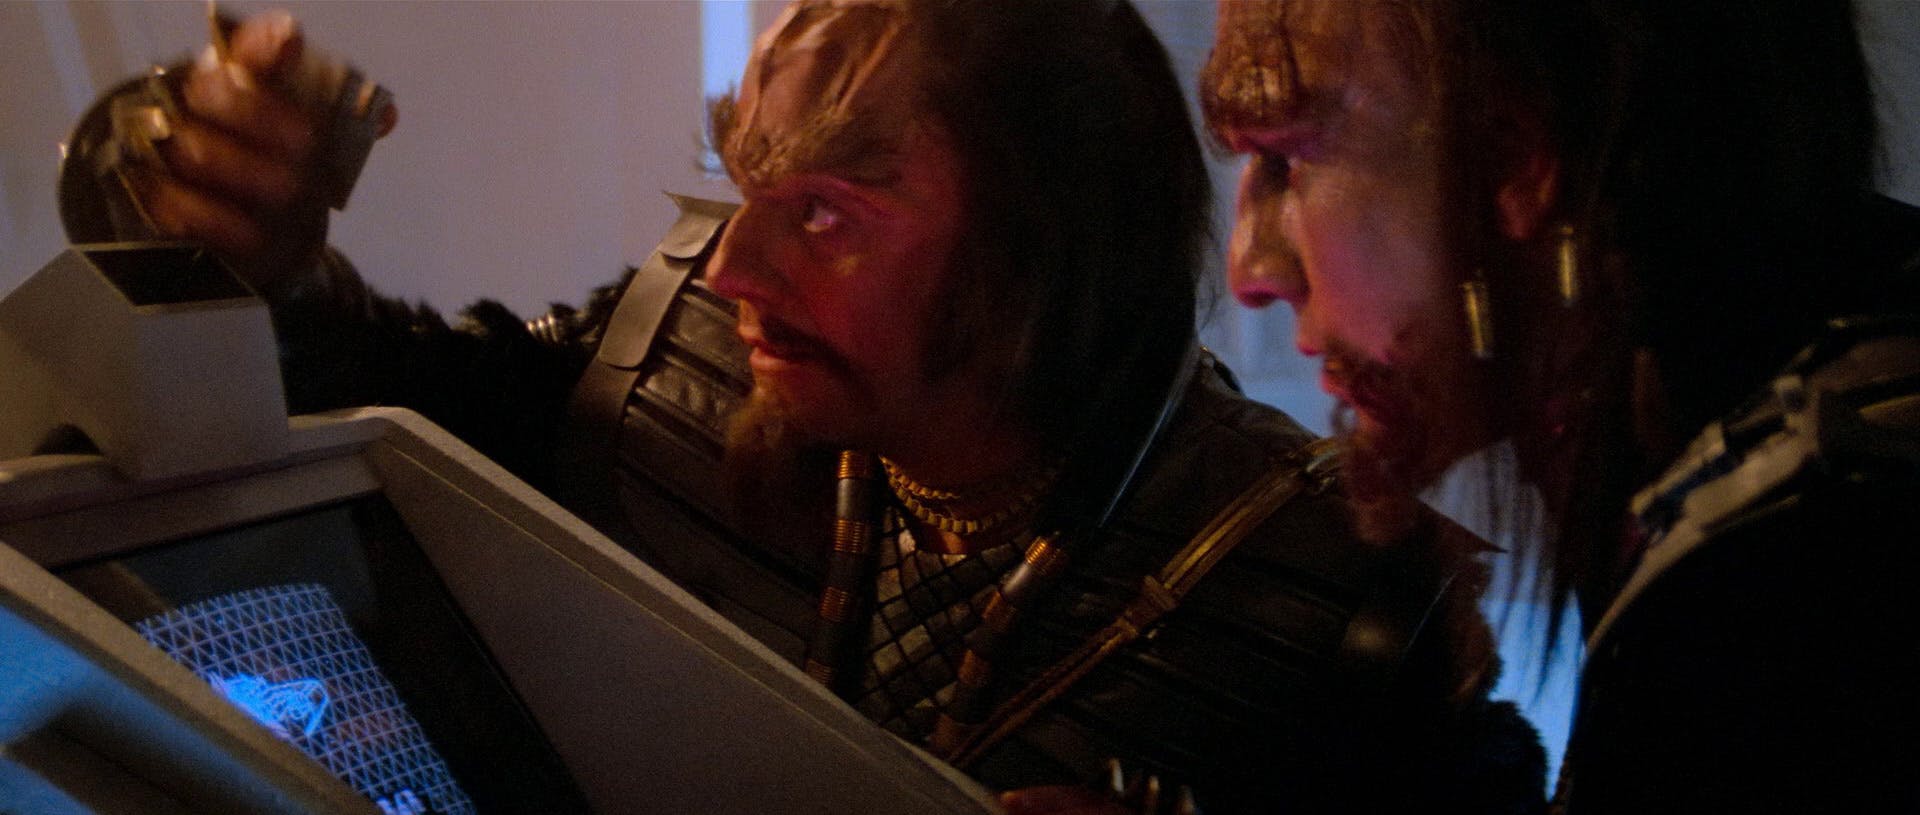 Hovering above a station's monitor, Kruge and a fellow Klingon warrior learn about the Project Genesis on-screen in 'Star Trek III: The Search for Spock'